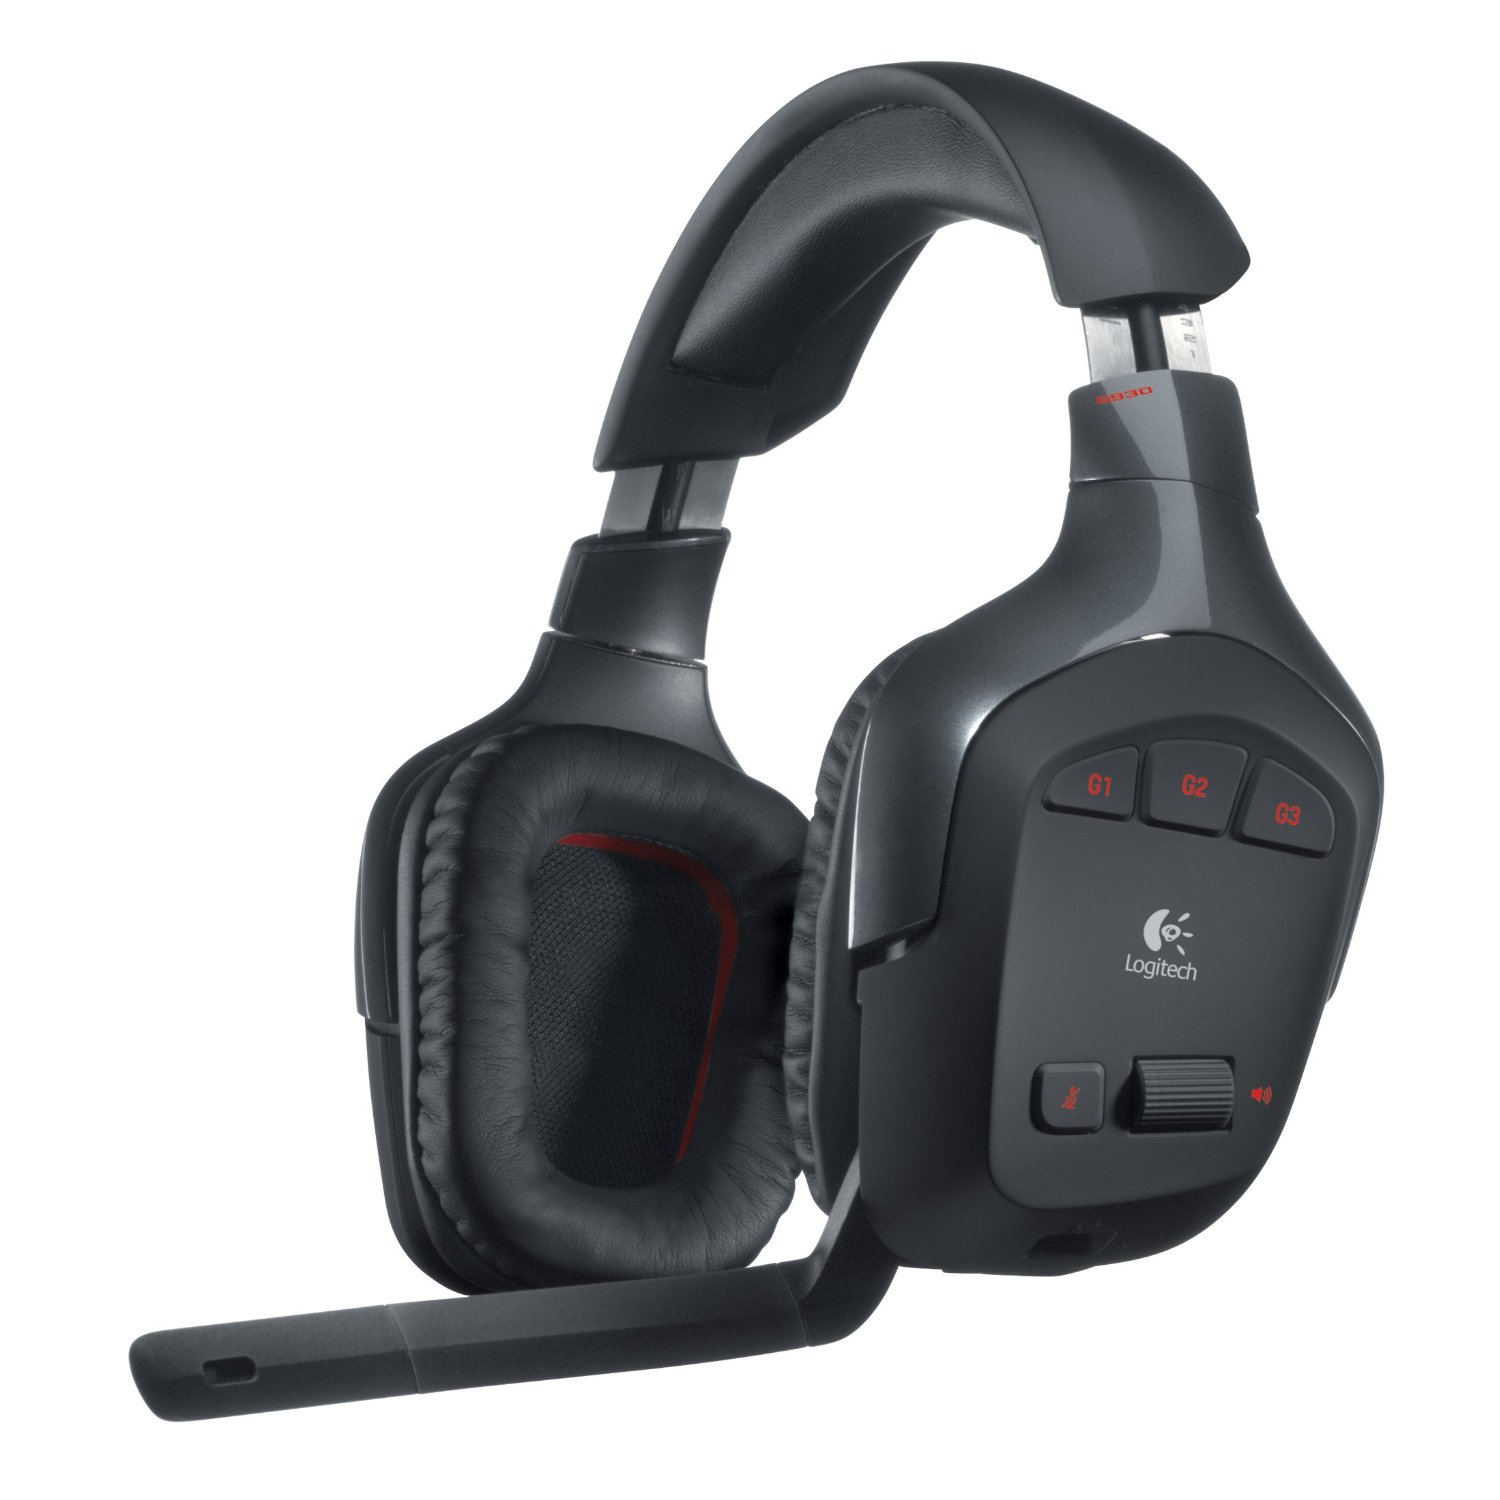 http://thetechjournal.com/wp-content/uploads/images/1108/1313390210-logitech-wireless-gaming-headset-g930-with-71-surround-sound-1.jpg